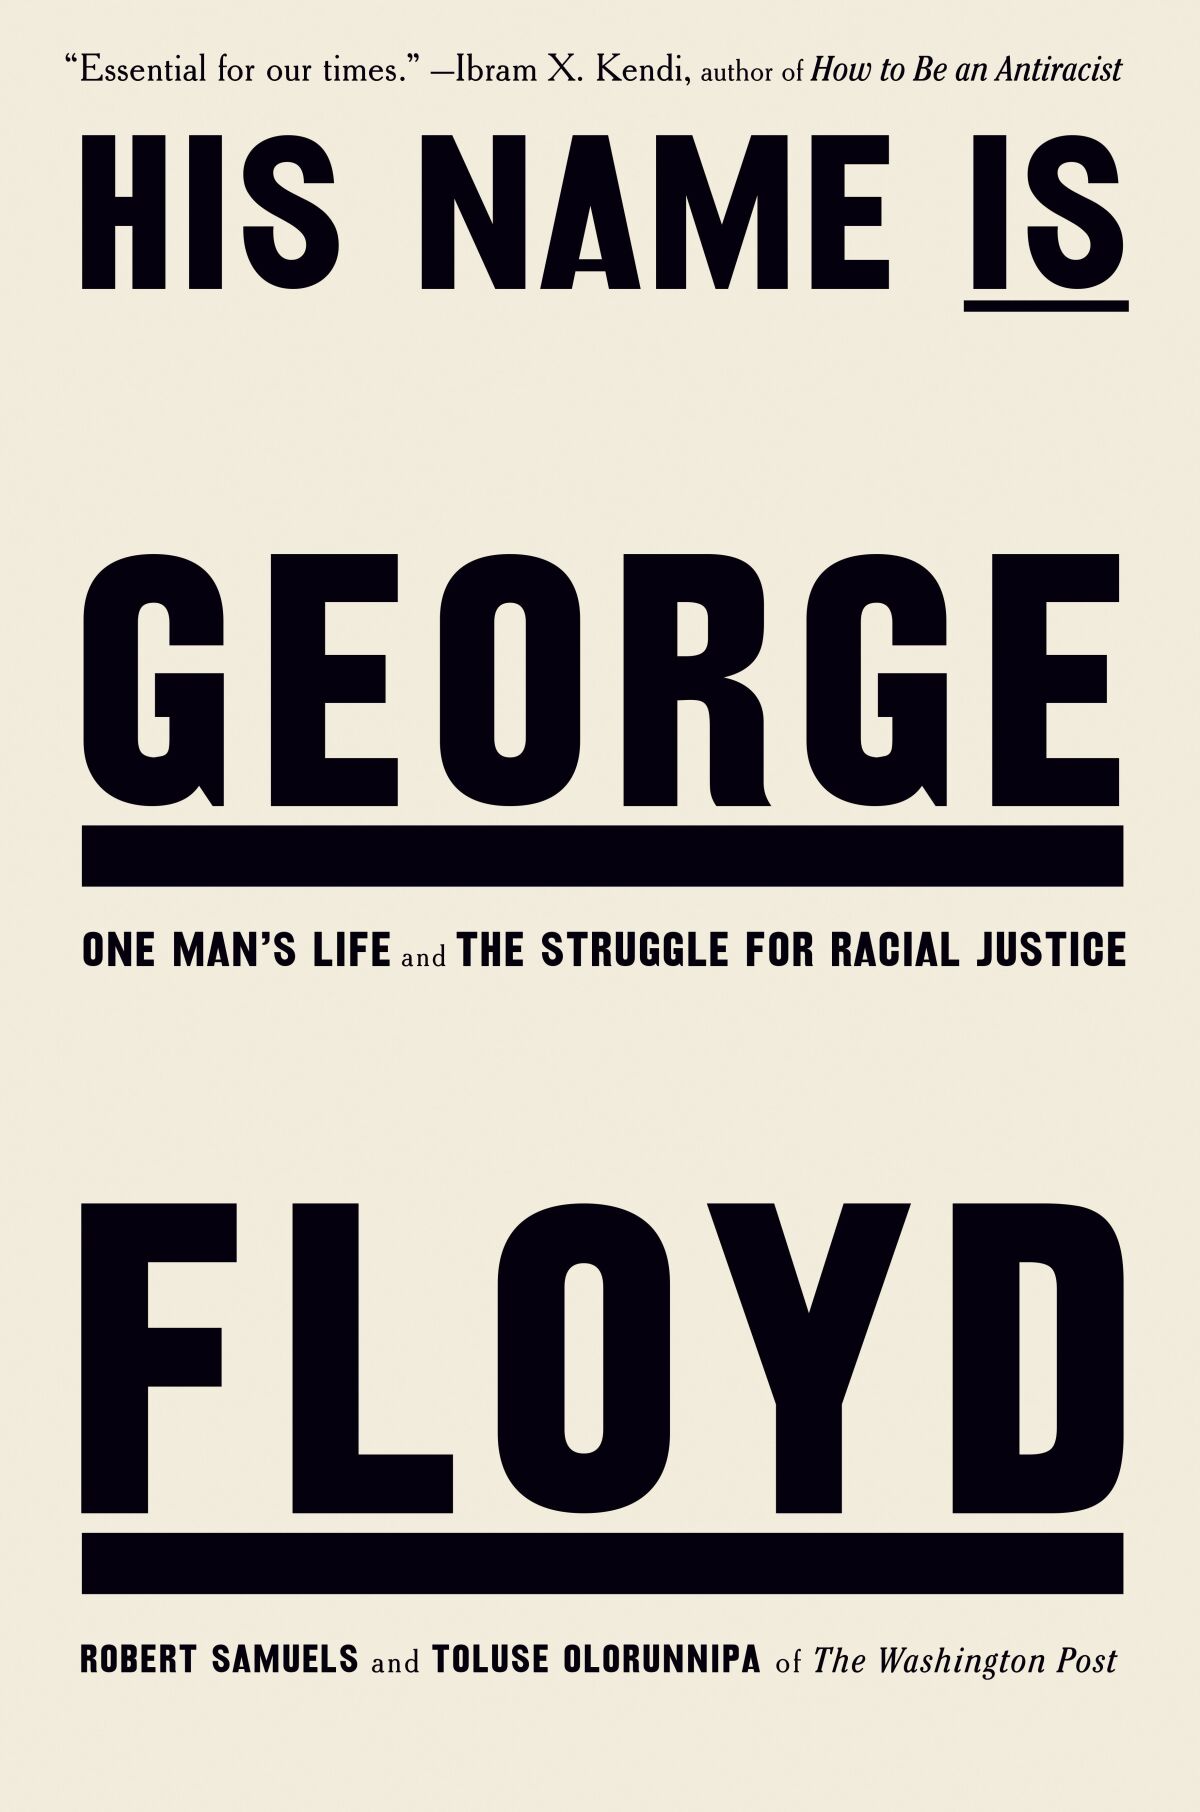 This cover image released by Viking shows "His Name is George Floyd: One Man's Life and the Struggle for Racial Justice" by Robert Samuels and Toluse Olorunnipa. (Viking via AP)